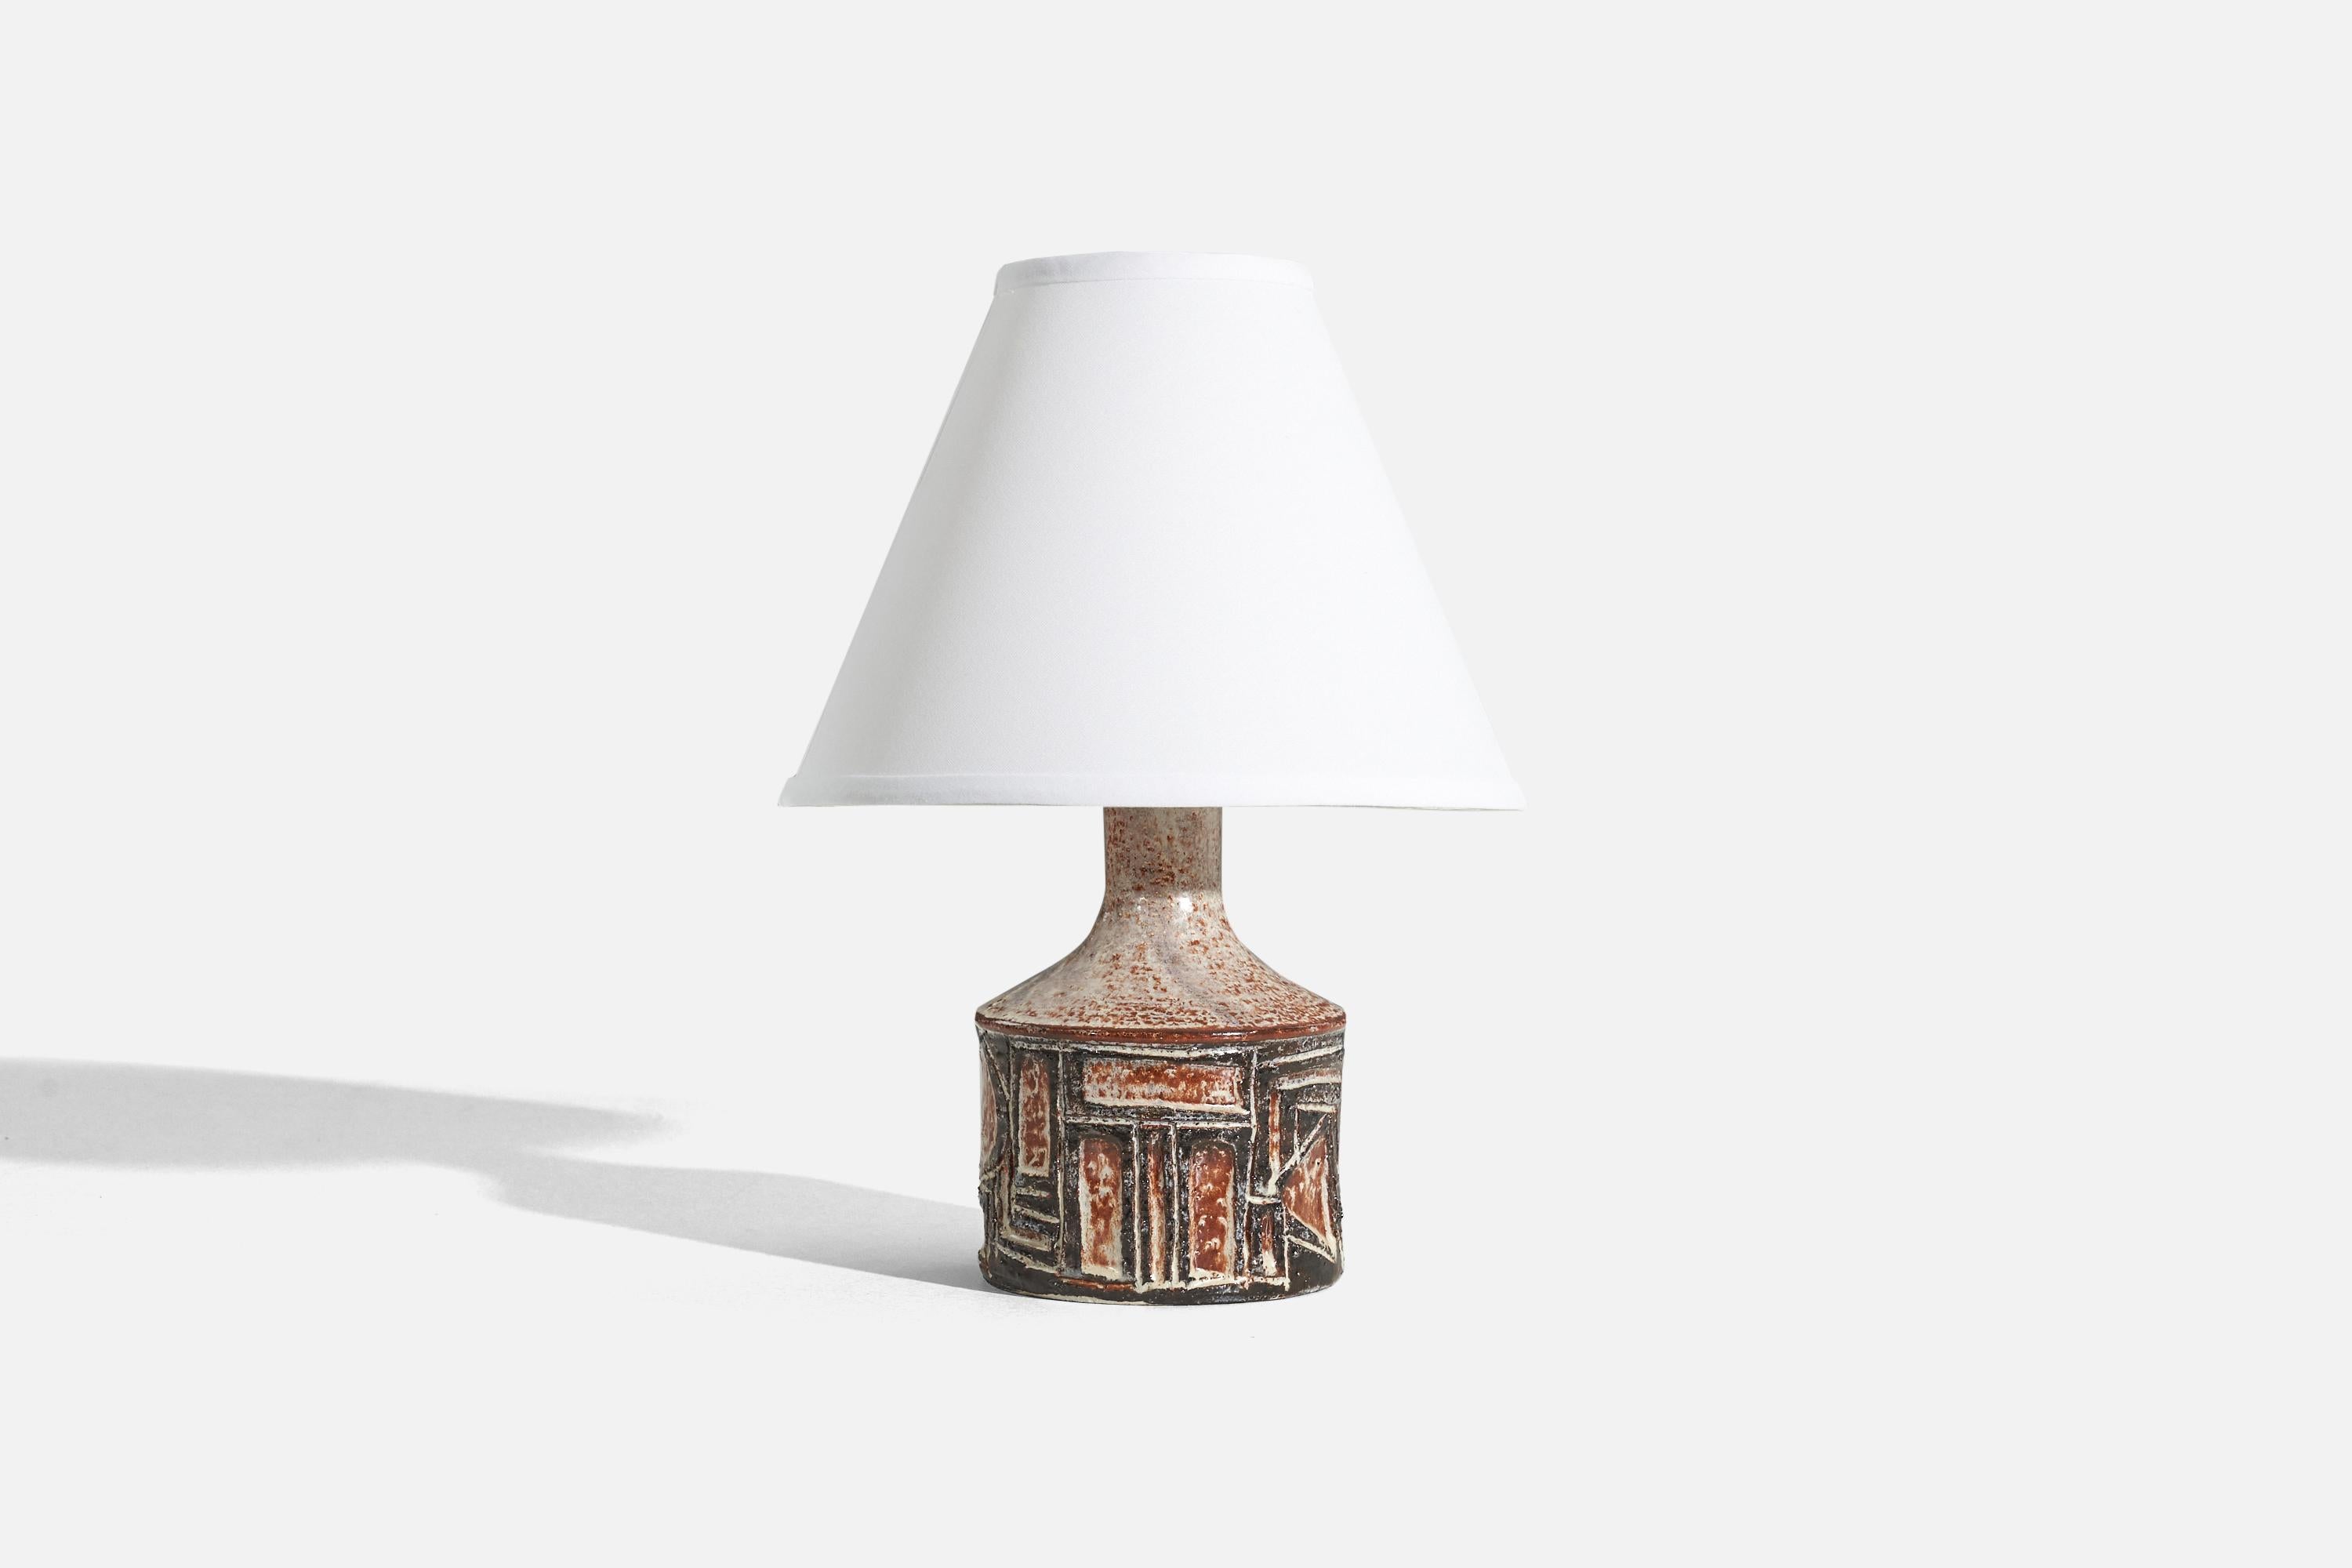 A black and red, glazed stoneware table lamp designed and produced by Jette Hellerøe, Denmark, 1960s.

Sold without lampshade. 
Dimensions of Lamp (inches) : 9.875 x 4.875 x 4.875 (H x W x D)
Dimensions of Shade (inches) : 4.25 x 10.25 x 8 (T x B x